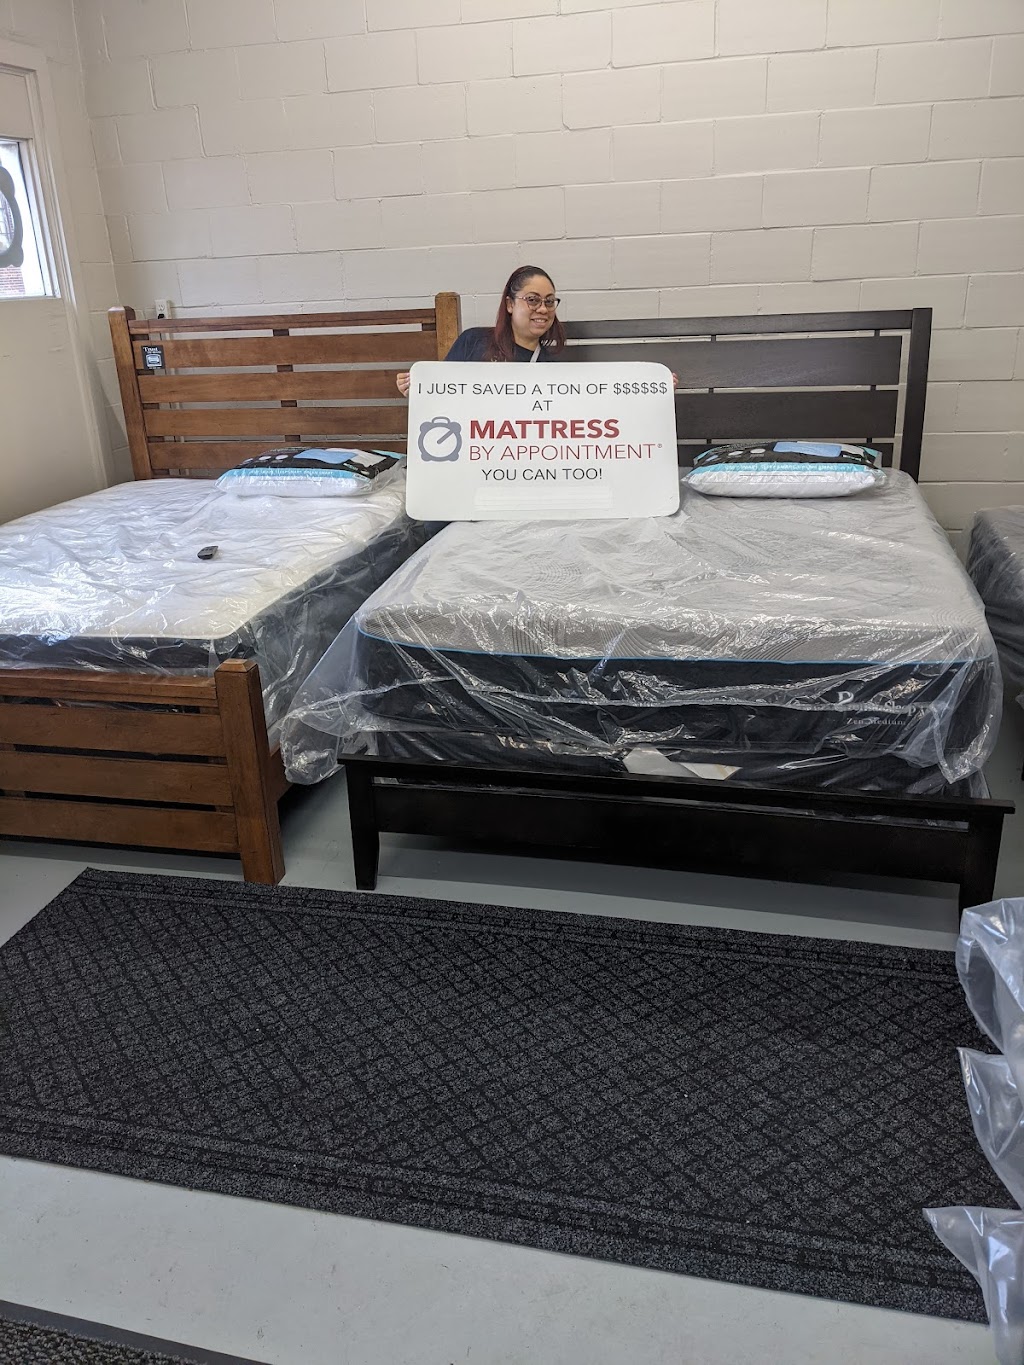 Mattress By Appointment | 410 Justice St, Fremont, OH 43420 | Phone: (419) 407-6963